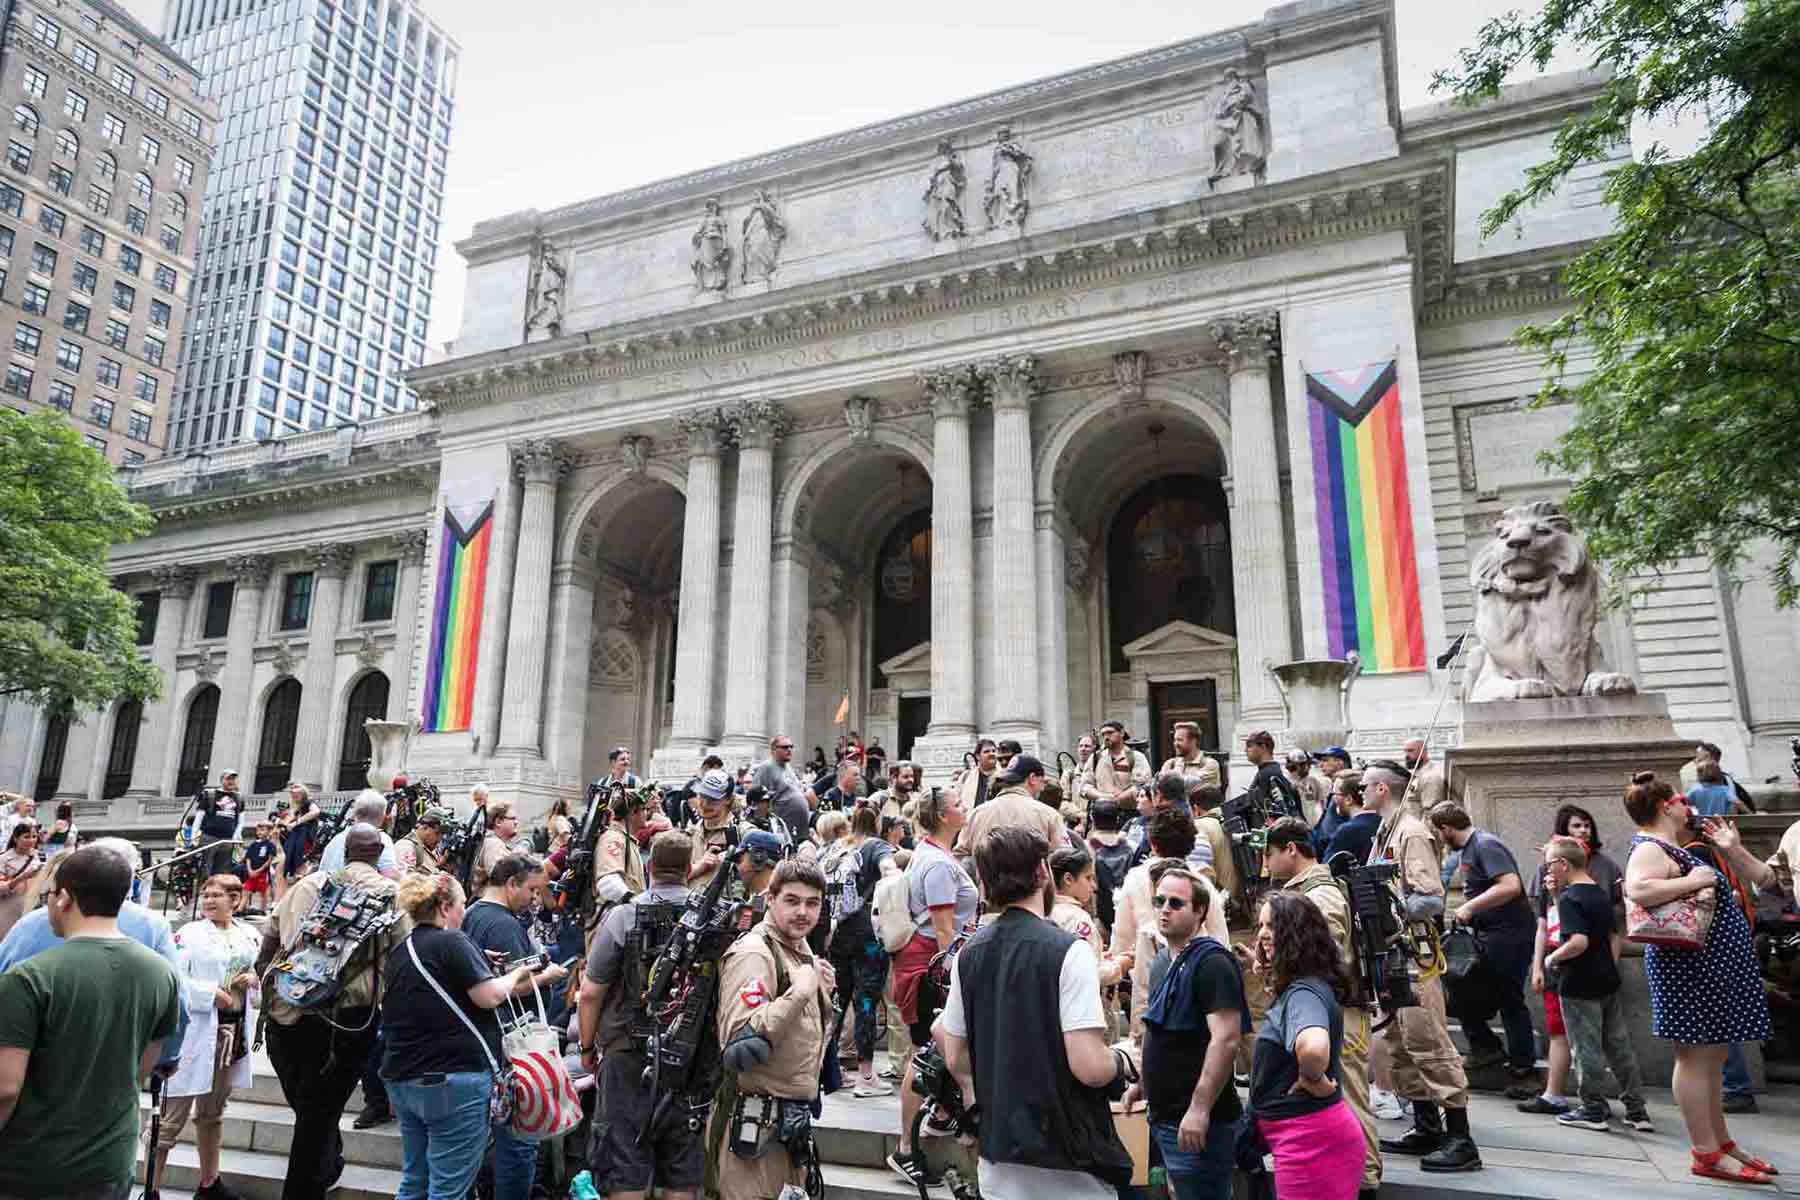 Mop of people in costume outside the New York Public Library to celebrate the 37th year of the movie Ghostbusters